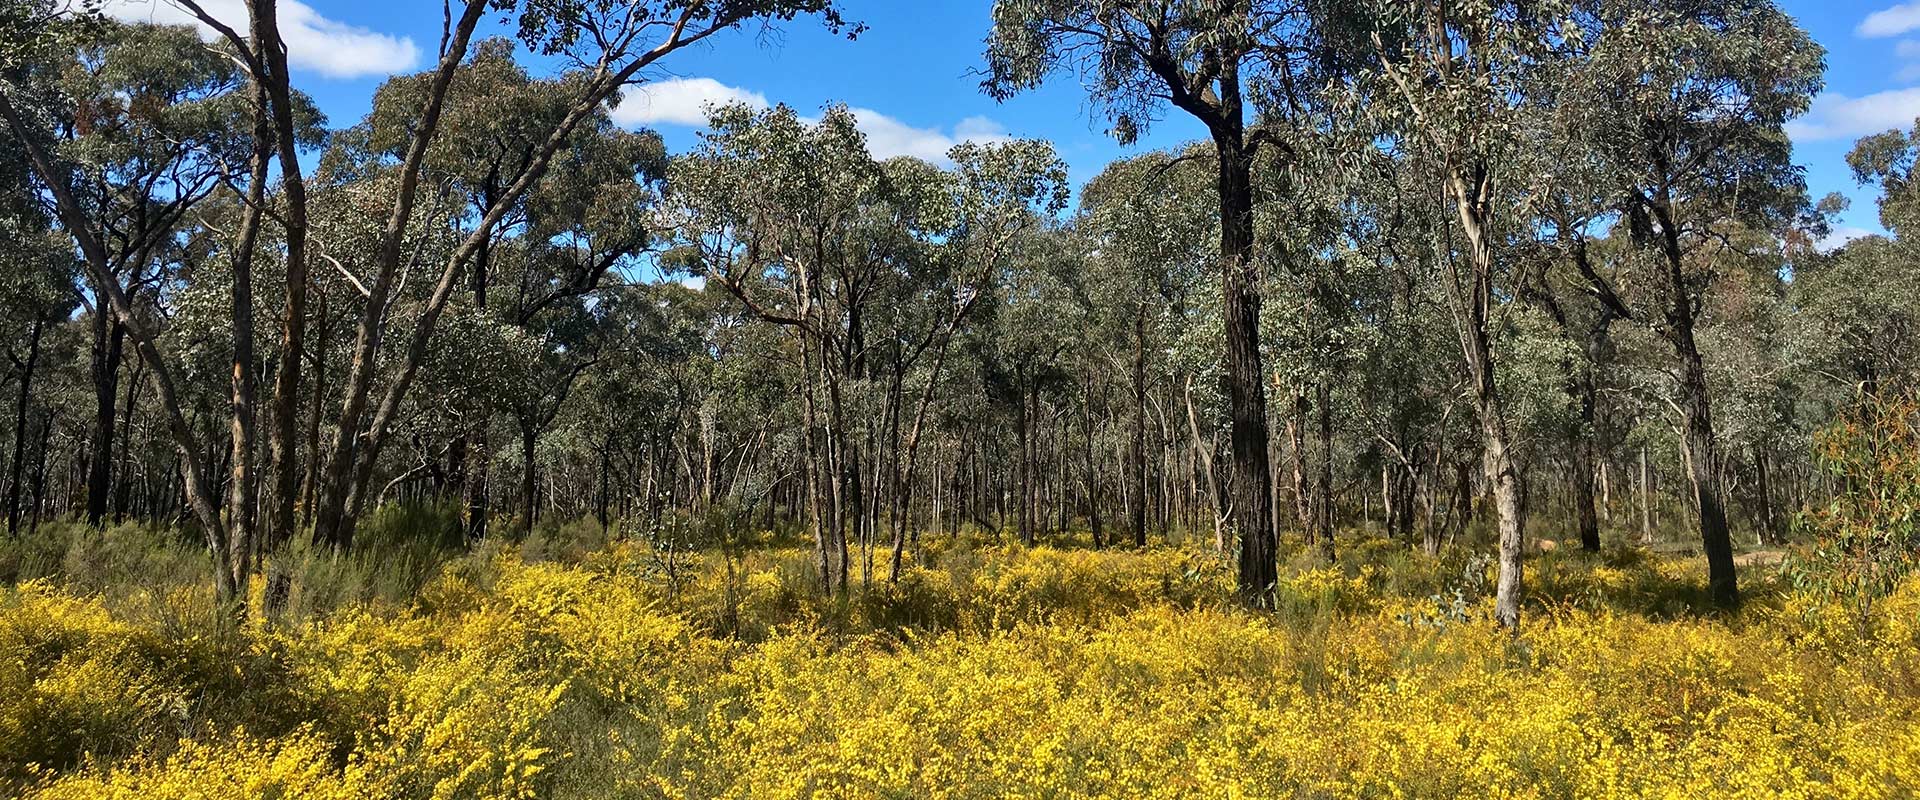 Rugged bushland with bright yellow flowering wattle.